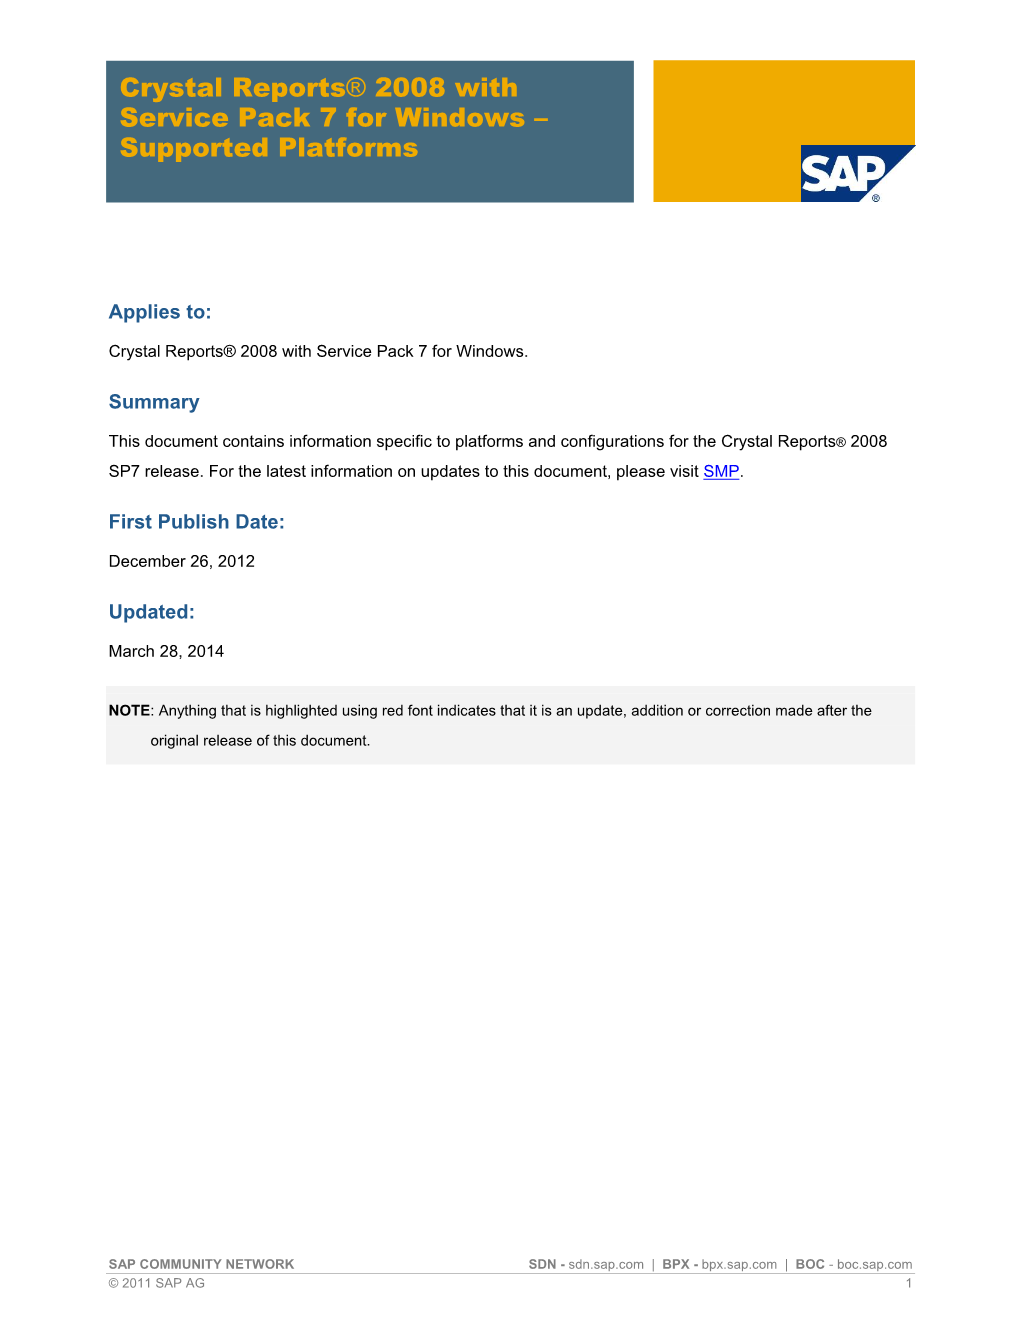 SAP Crystal Reports 2008 SP7 for Windows